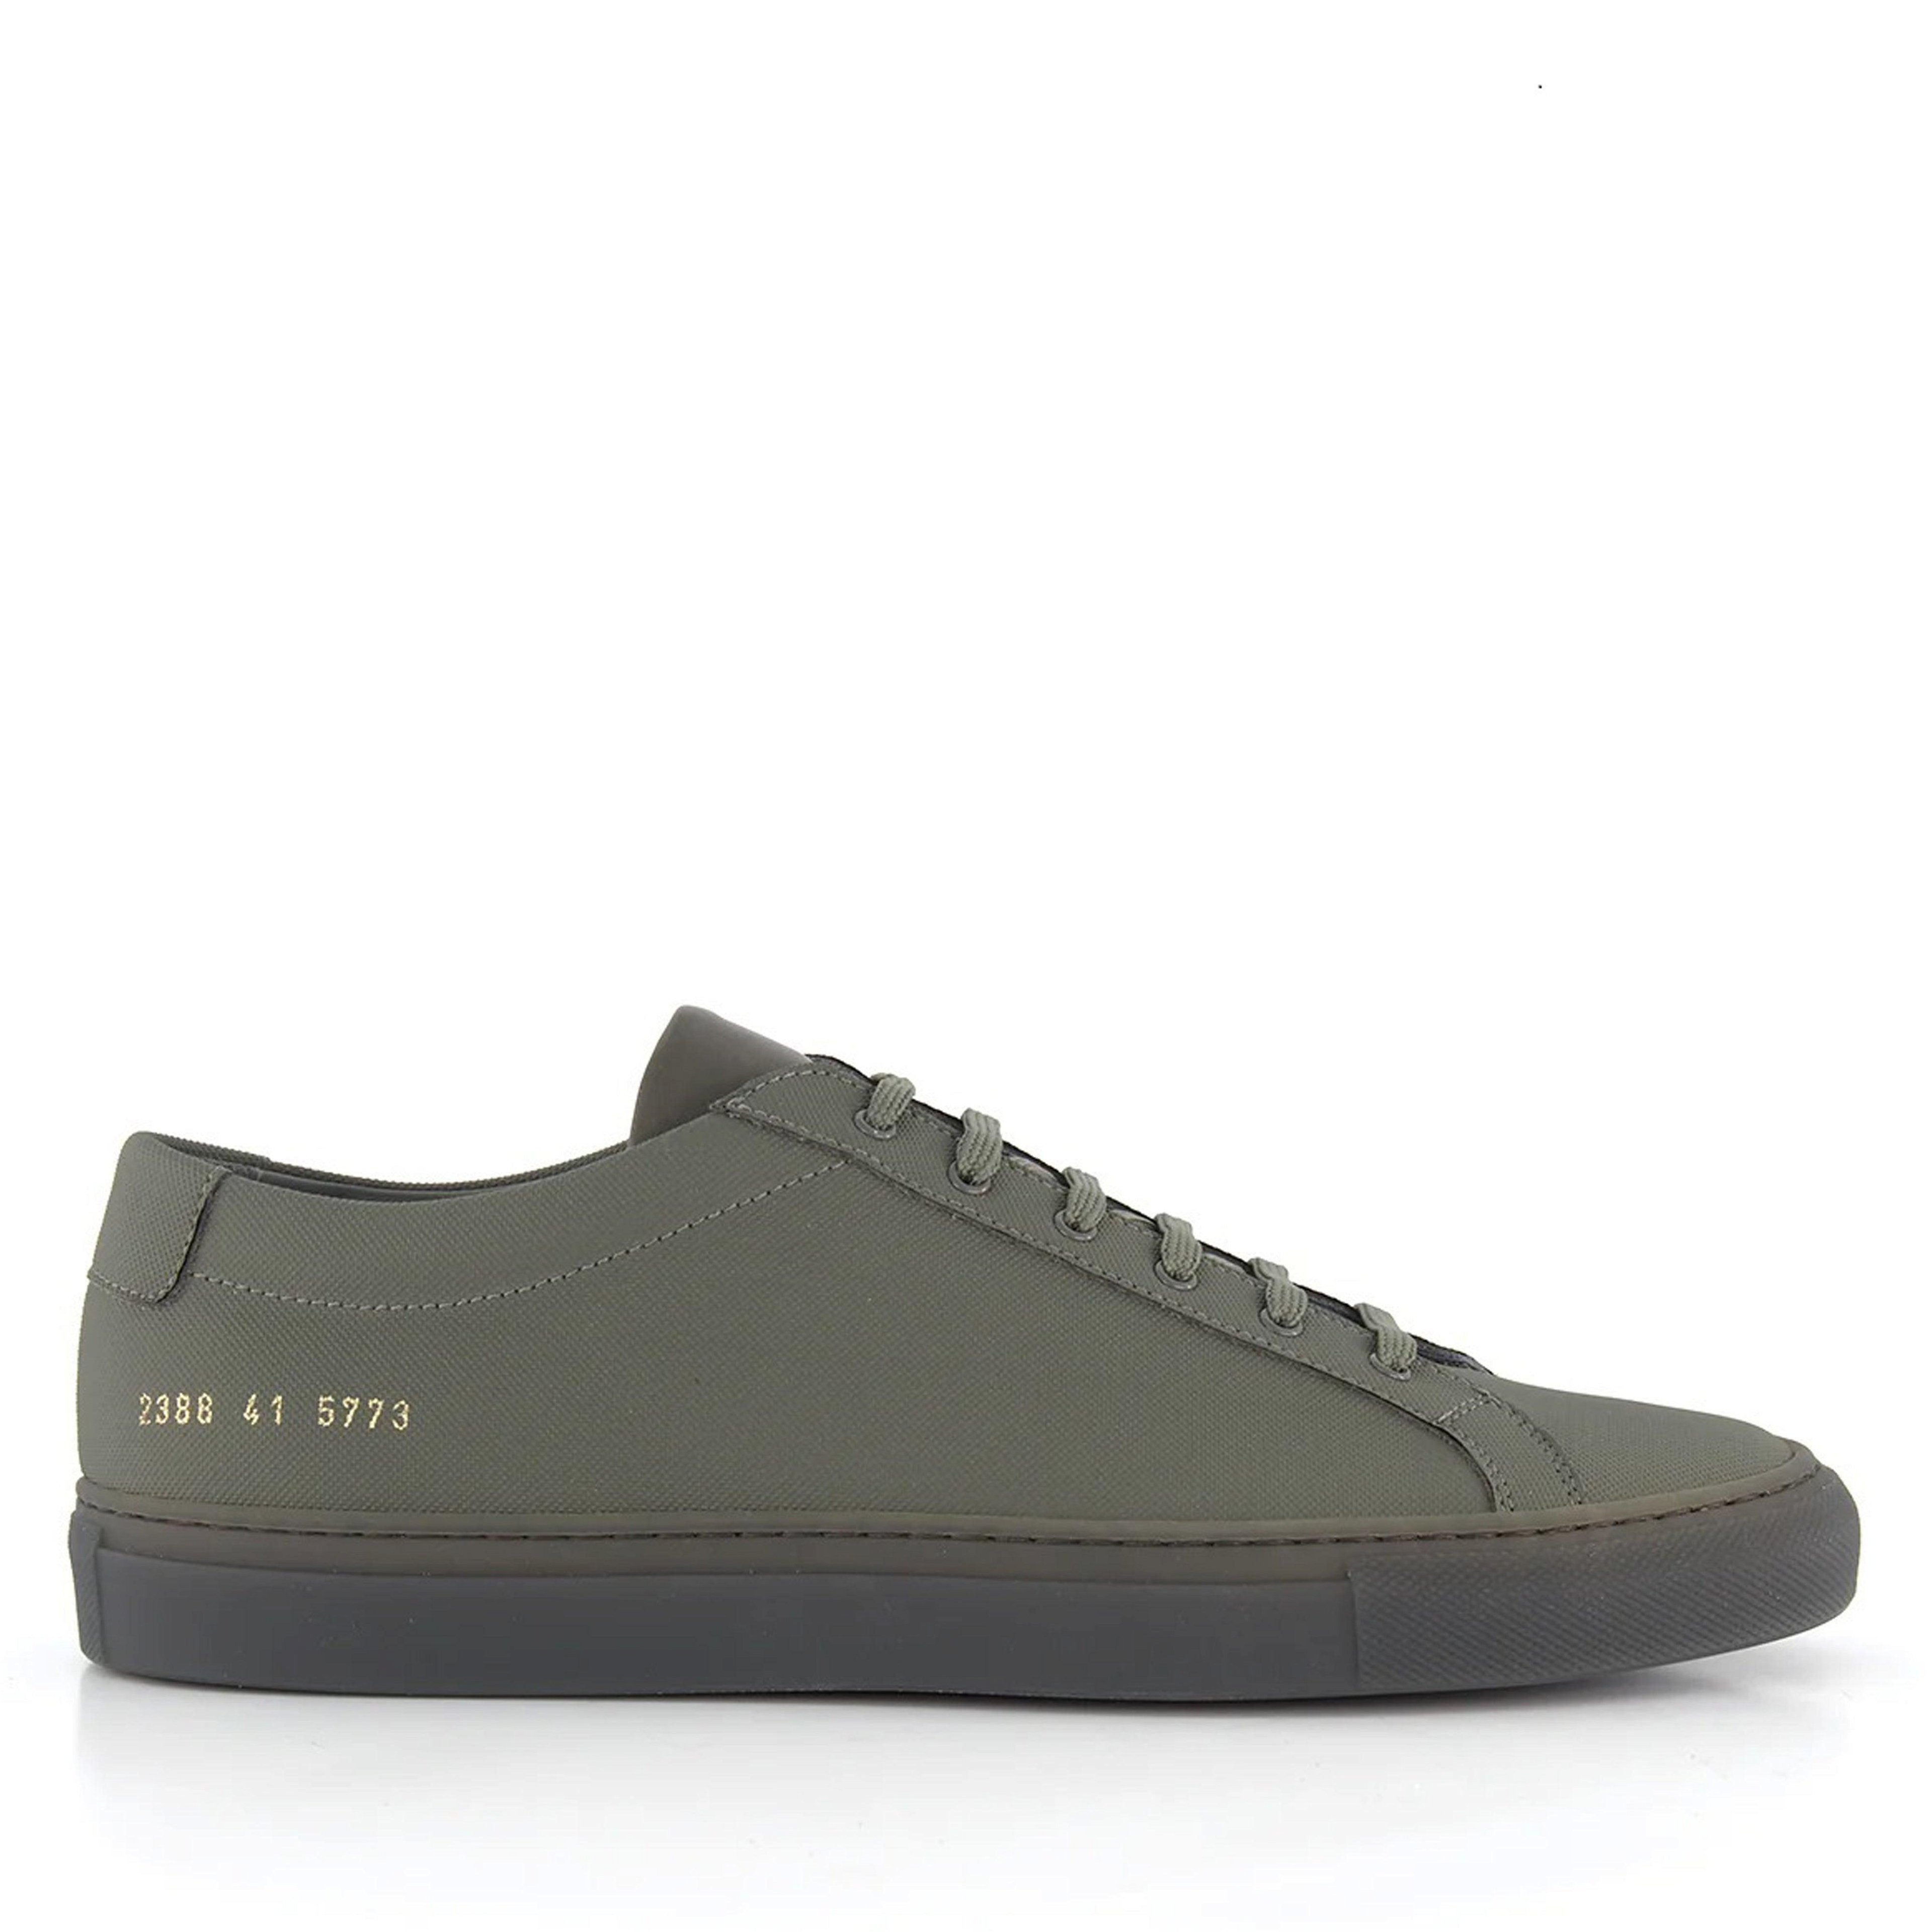 Common Projects - Achilles Tech Sneakers - (Army Green) by COMMON PROJECTS